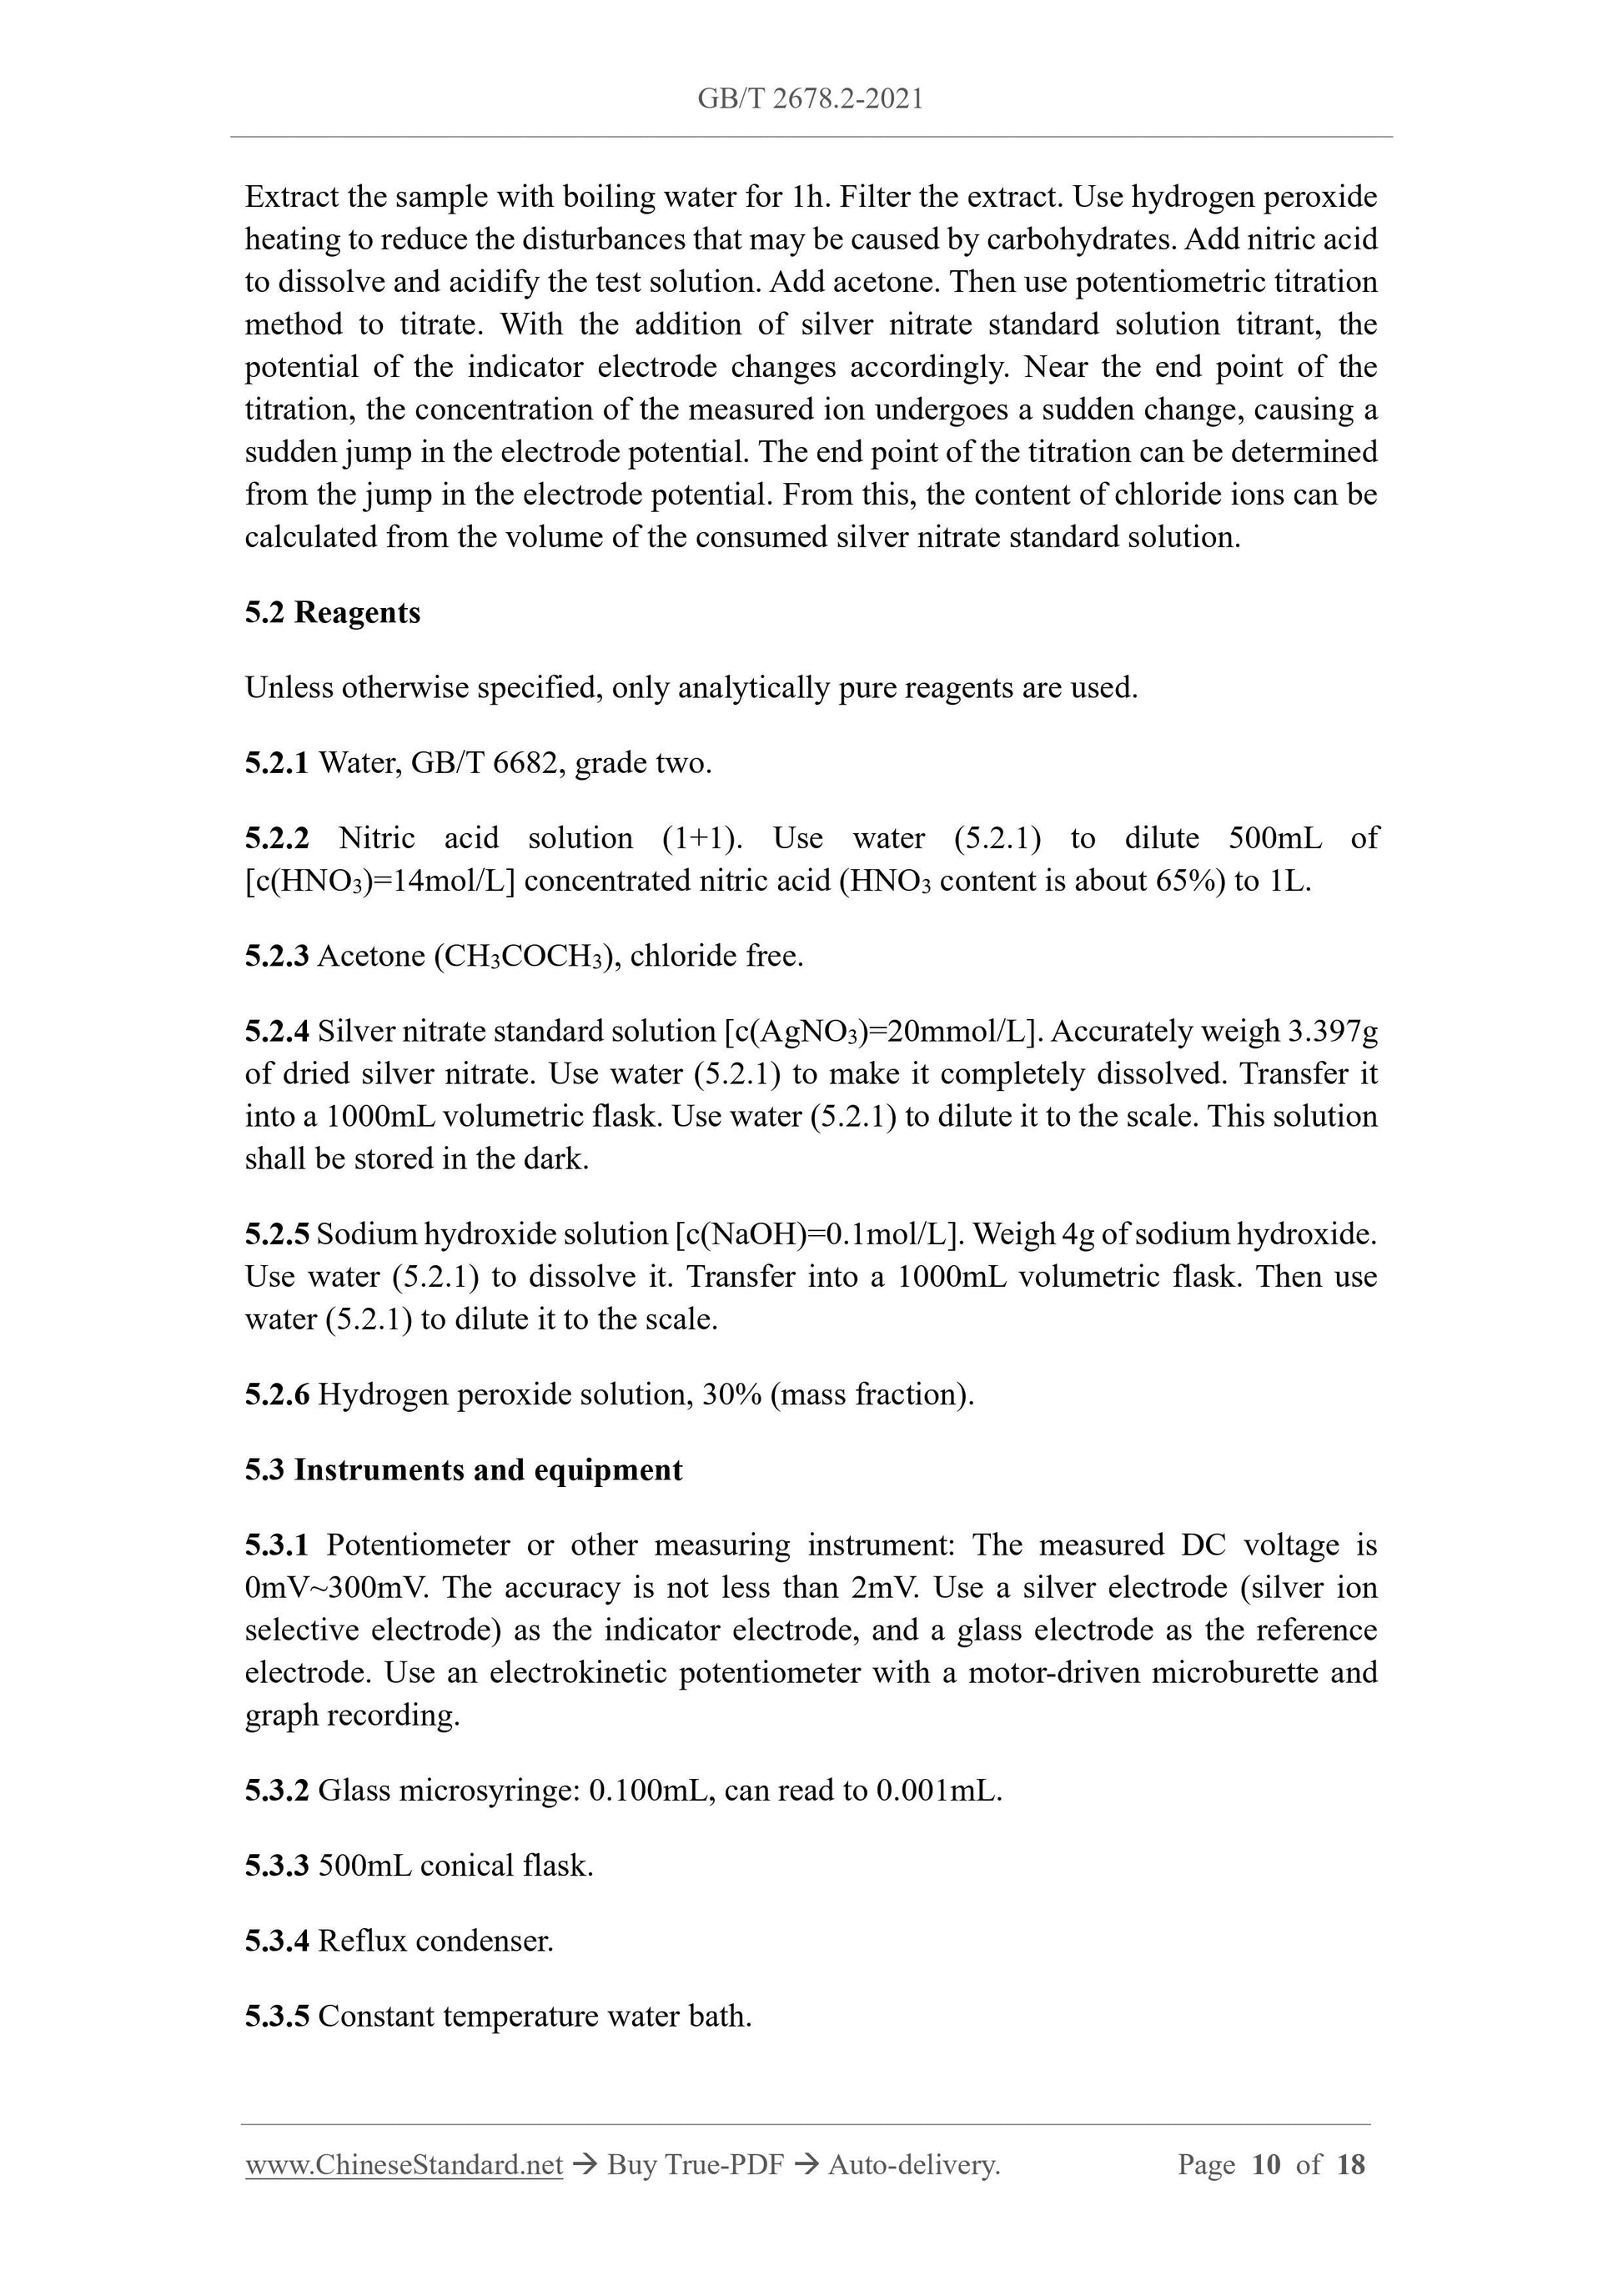 GB/T 2678.2-2021 Page 6